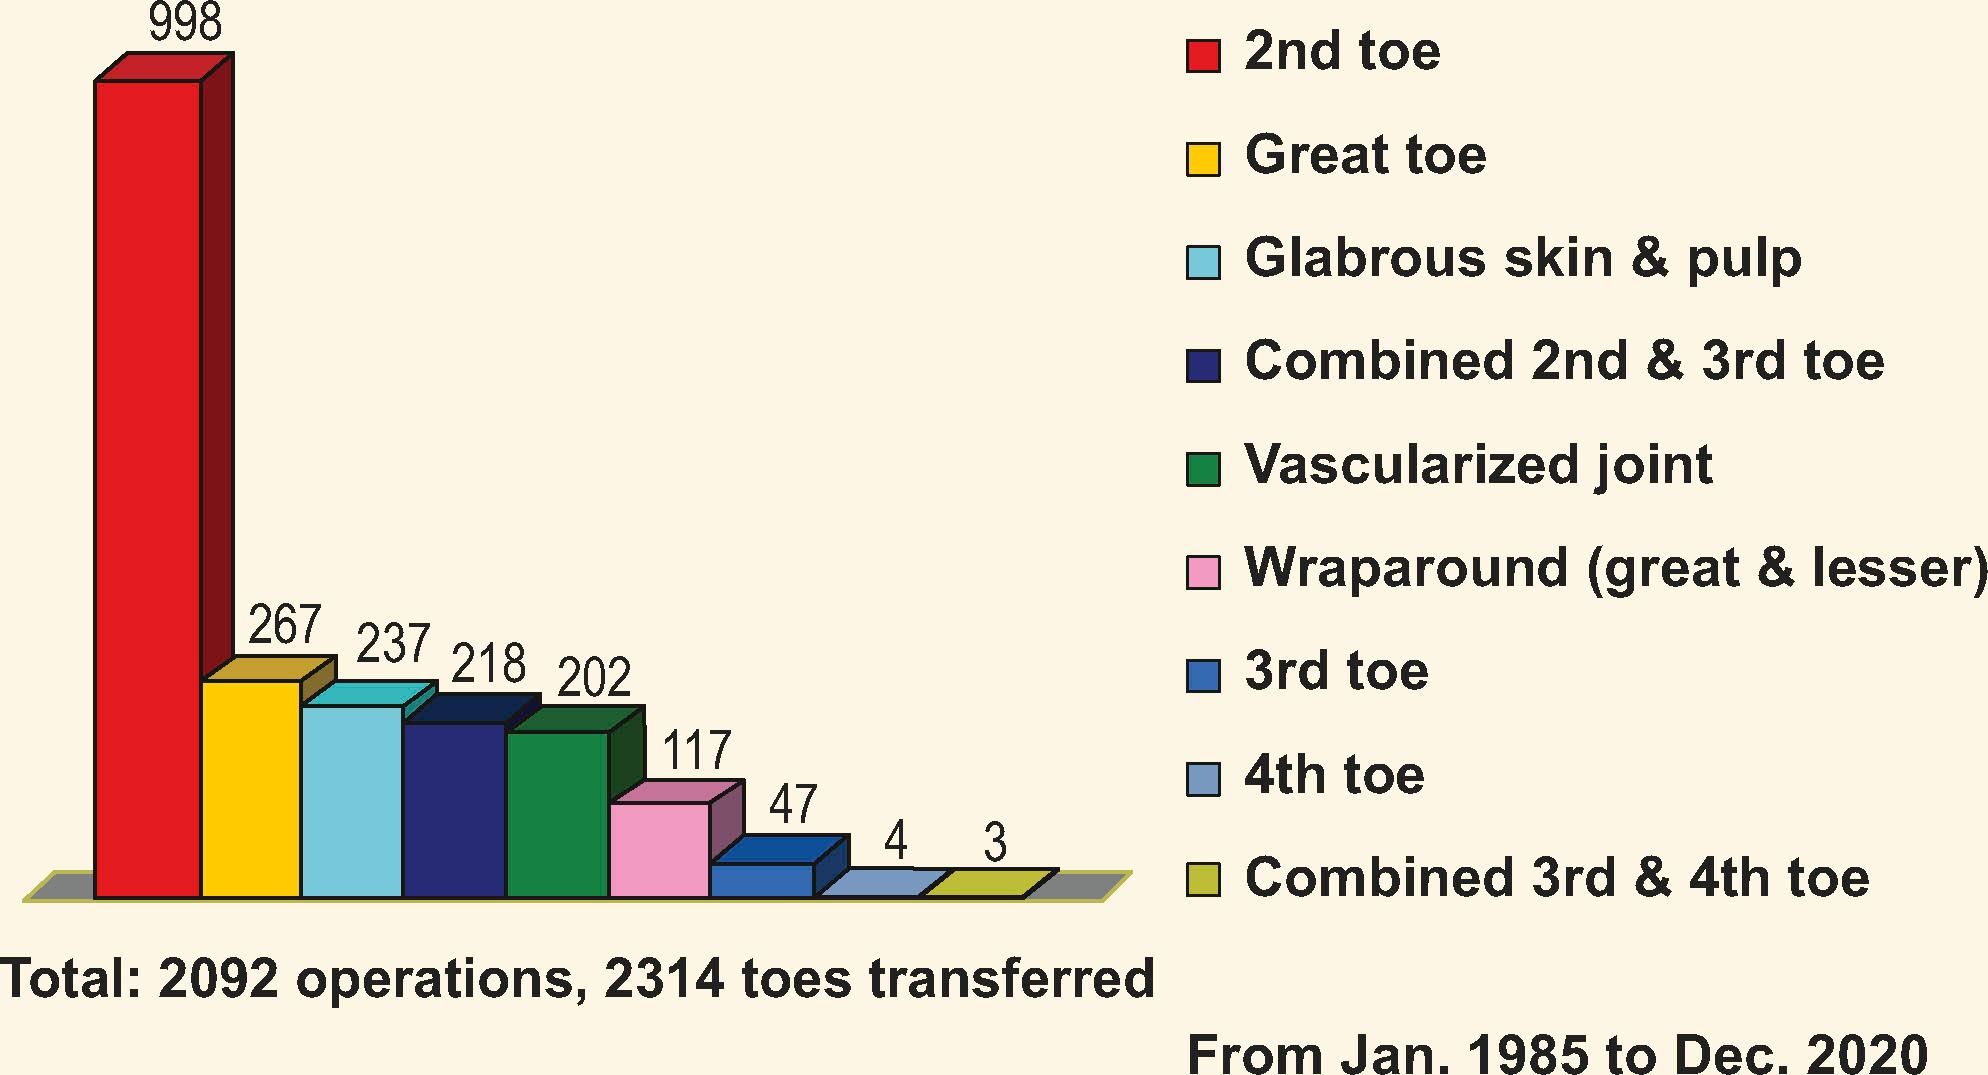 Figure 14.1, Number of toe-to-hand transplantation procedures performed at Chang Gung University Medical College Hospital from 1985 to 2015.